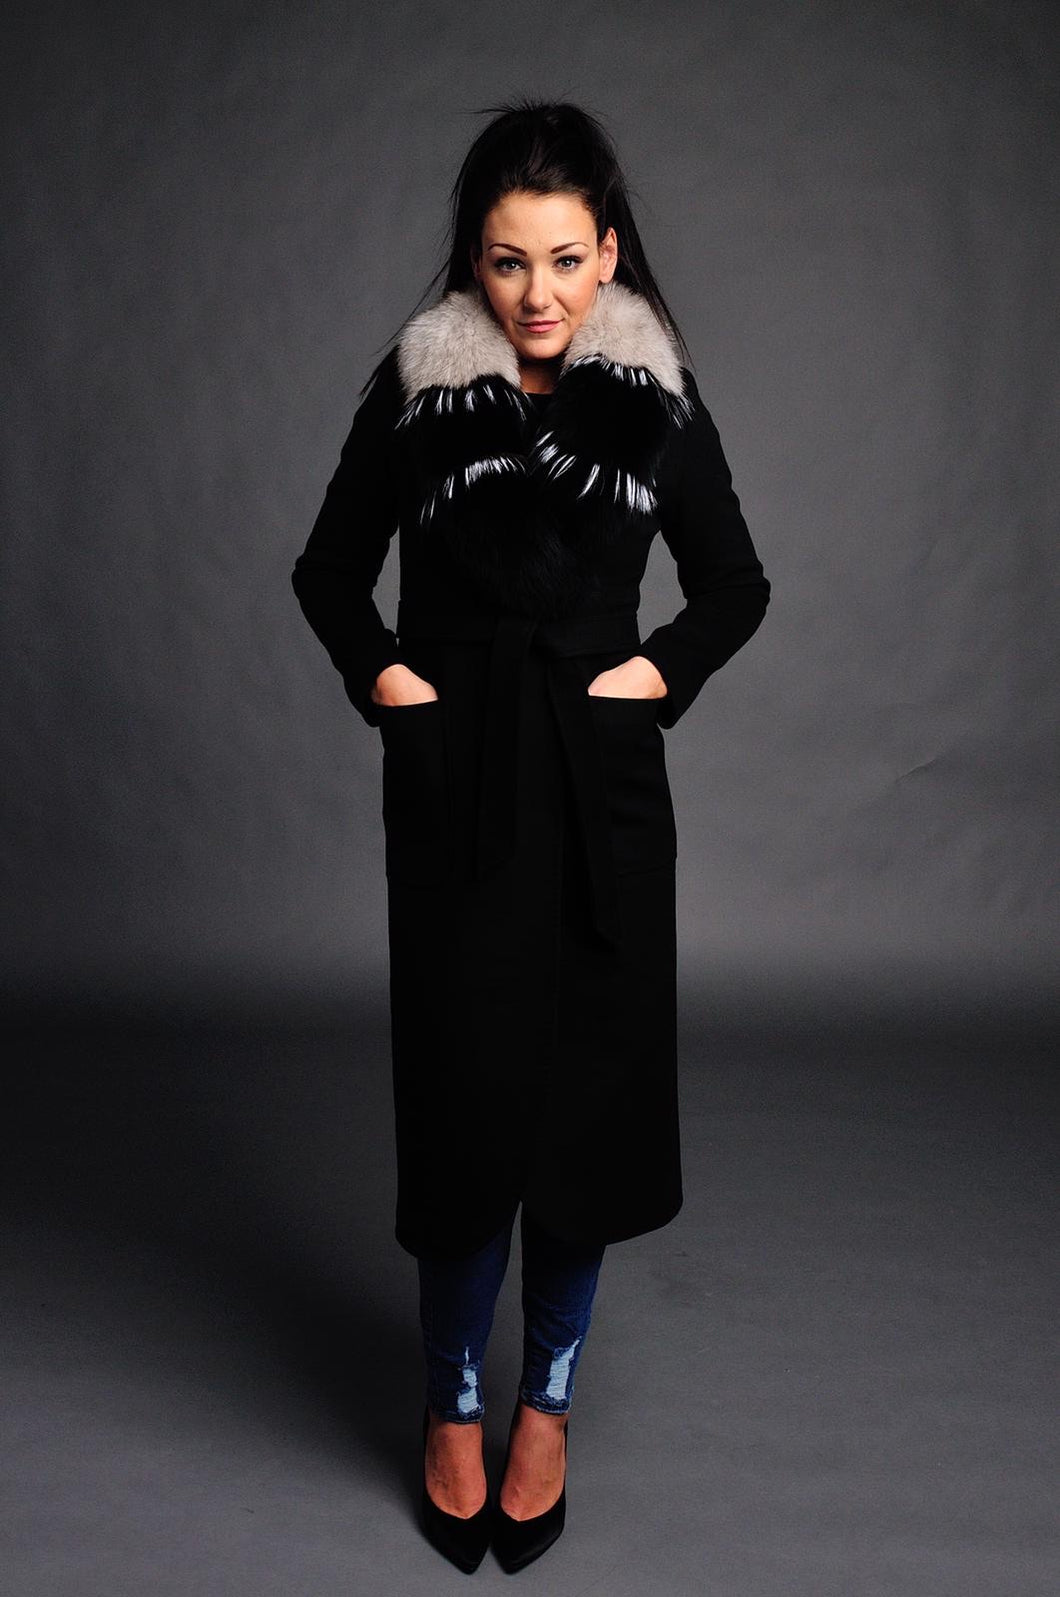 Colour: Black | Material :100% Real Fox Fur, 10% Cashmere, 60% Wool, 25% Lycra, 5% Vis | Professional dry clean only | Removable collar | European-made, imported to Canada | Stylish, flattering fit